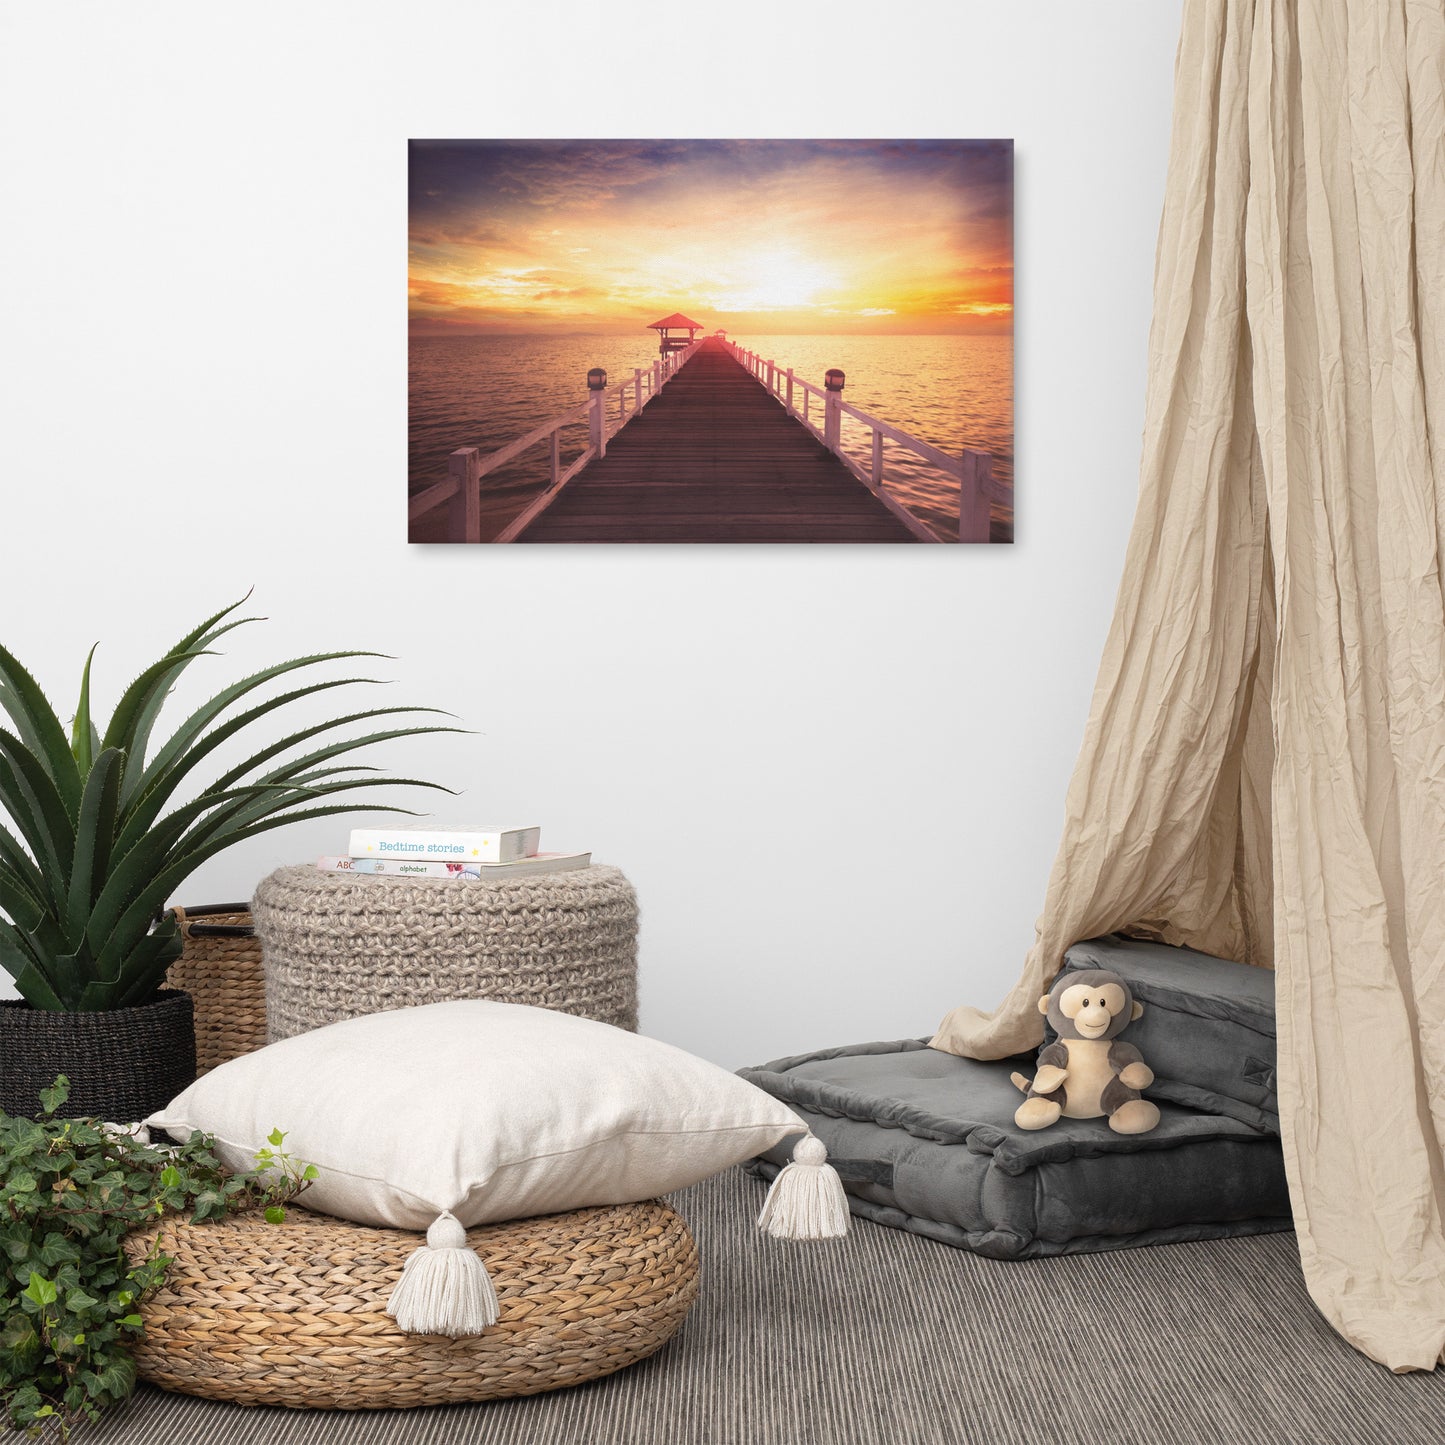 Surreal Wooden Pier at Sunset with Shadow and Summer Heat Effect Landscape Photo Canvas Wall Art Prints